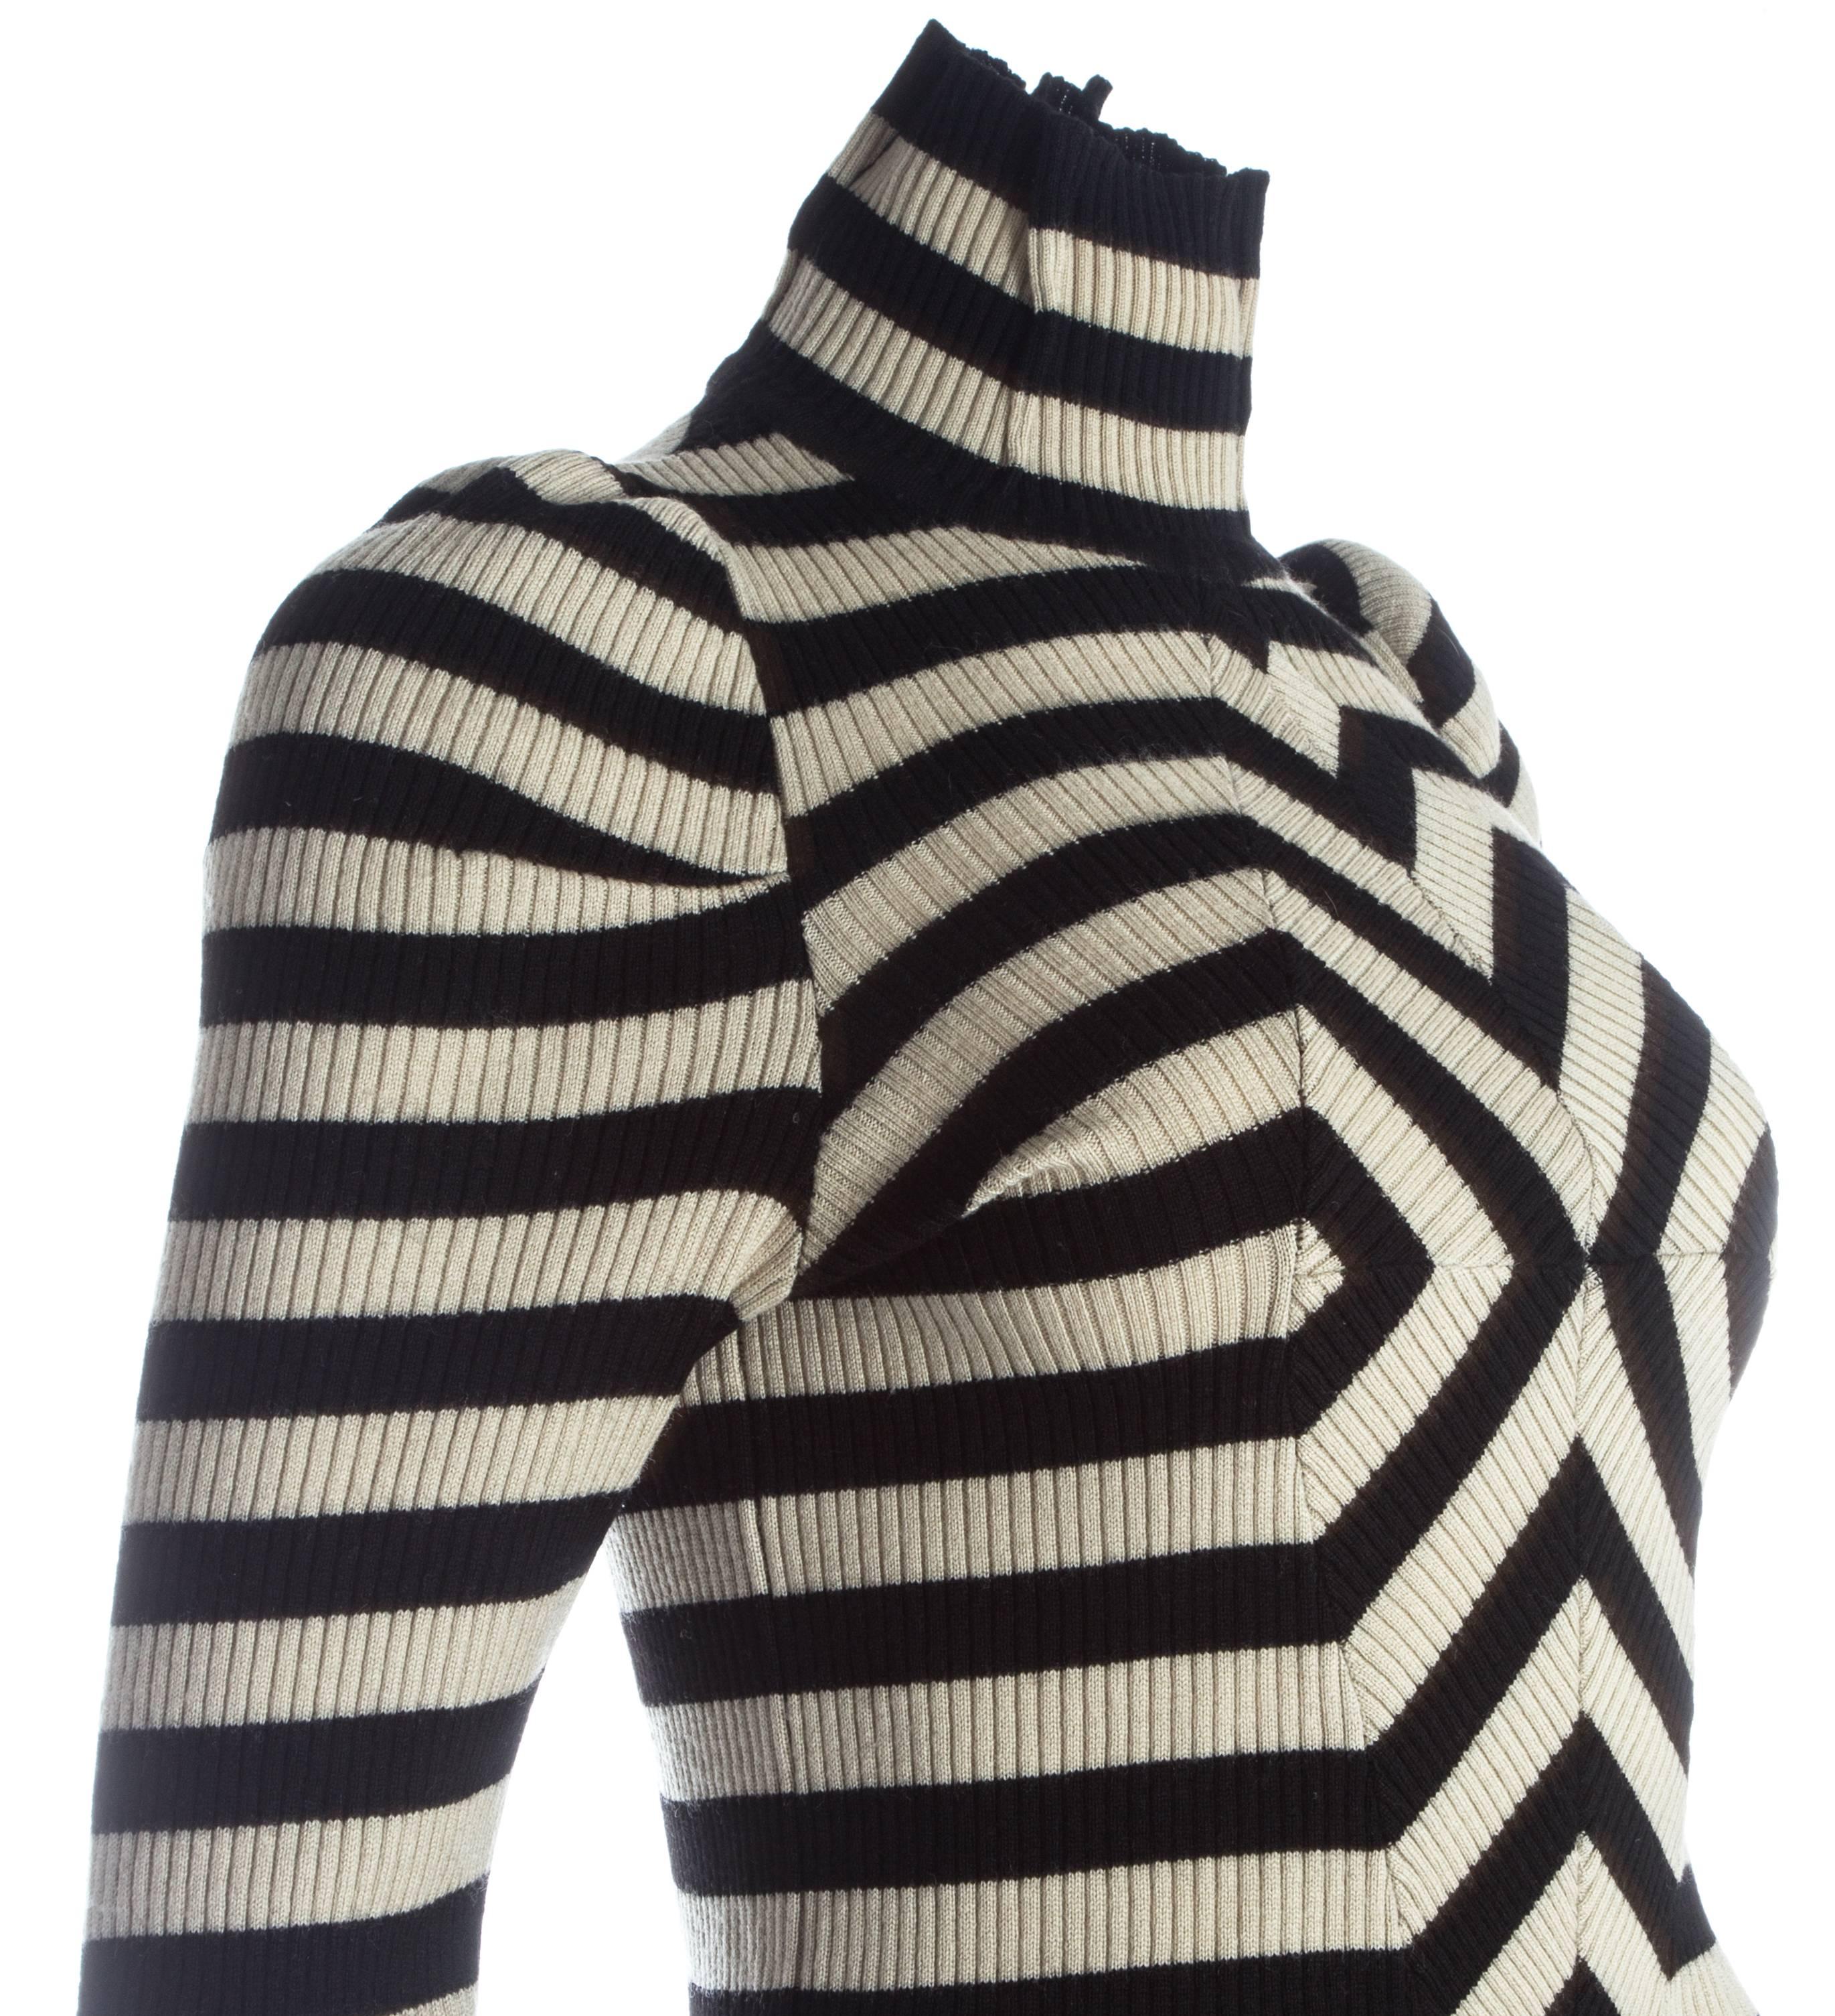 Women's or Men's Margiela striped sweater with leather elbow patches and inverted darts, A/W 1989